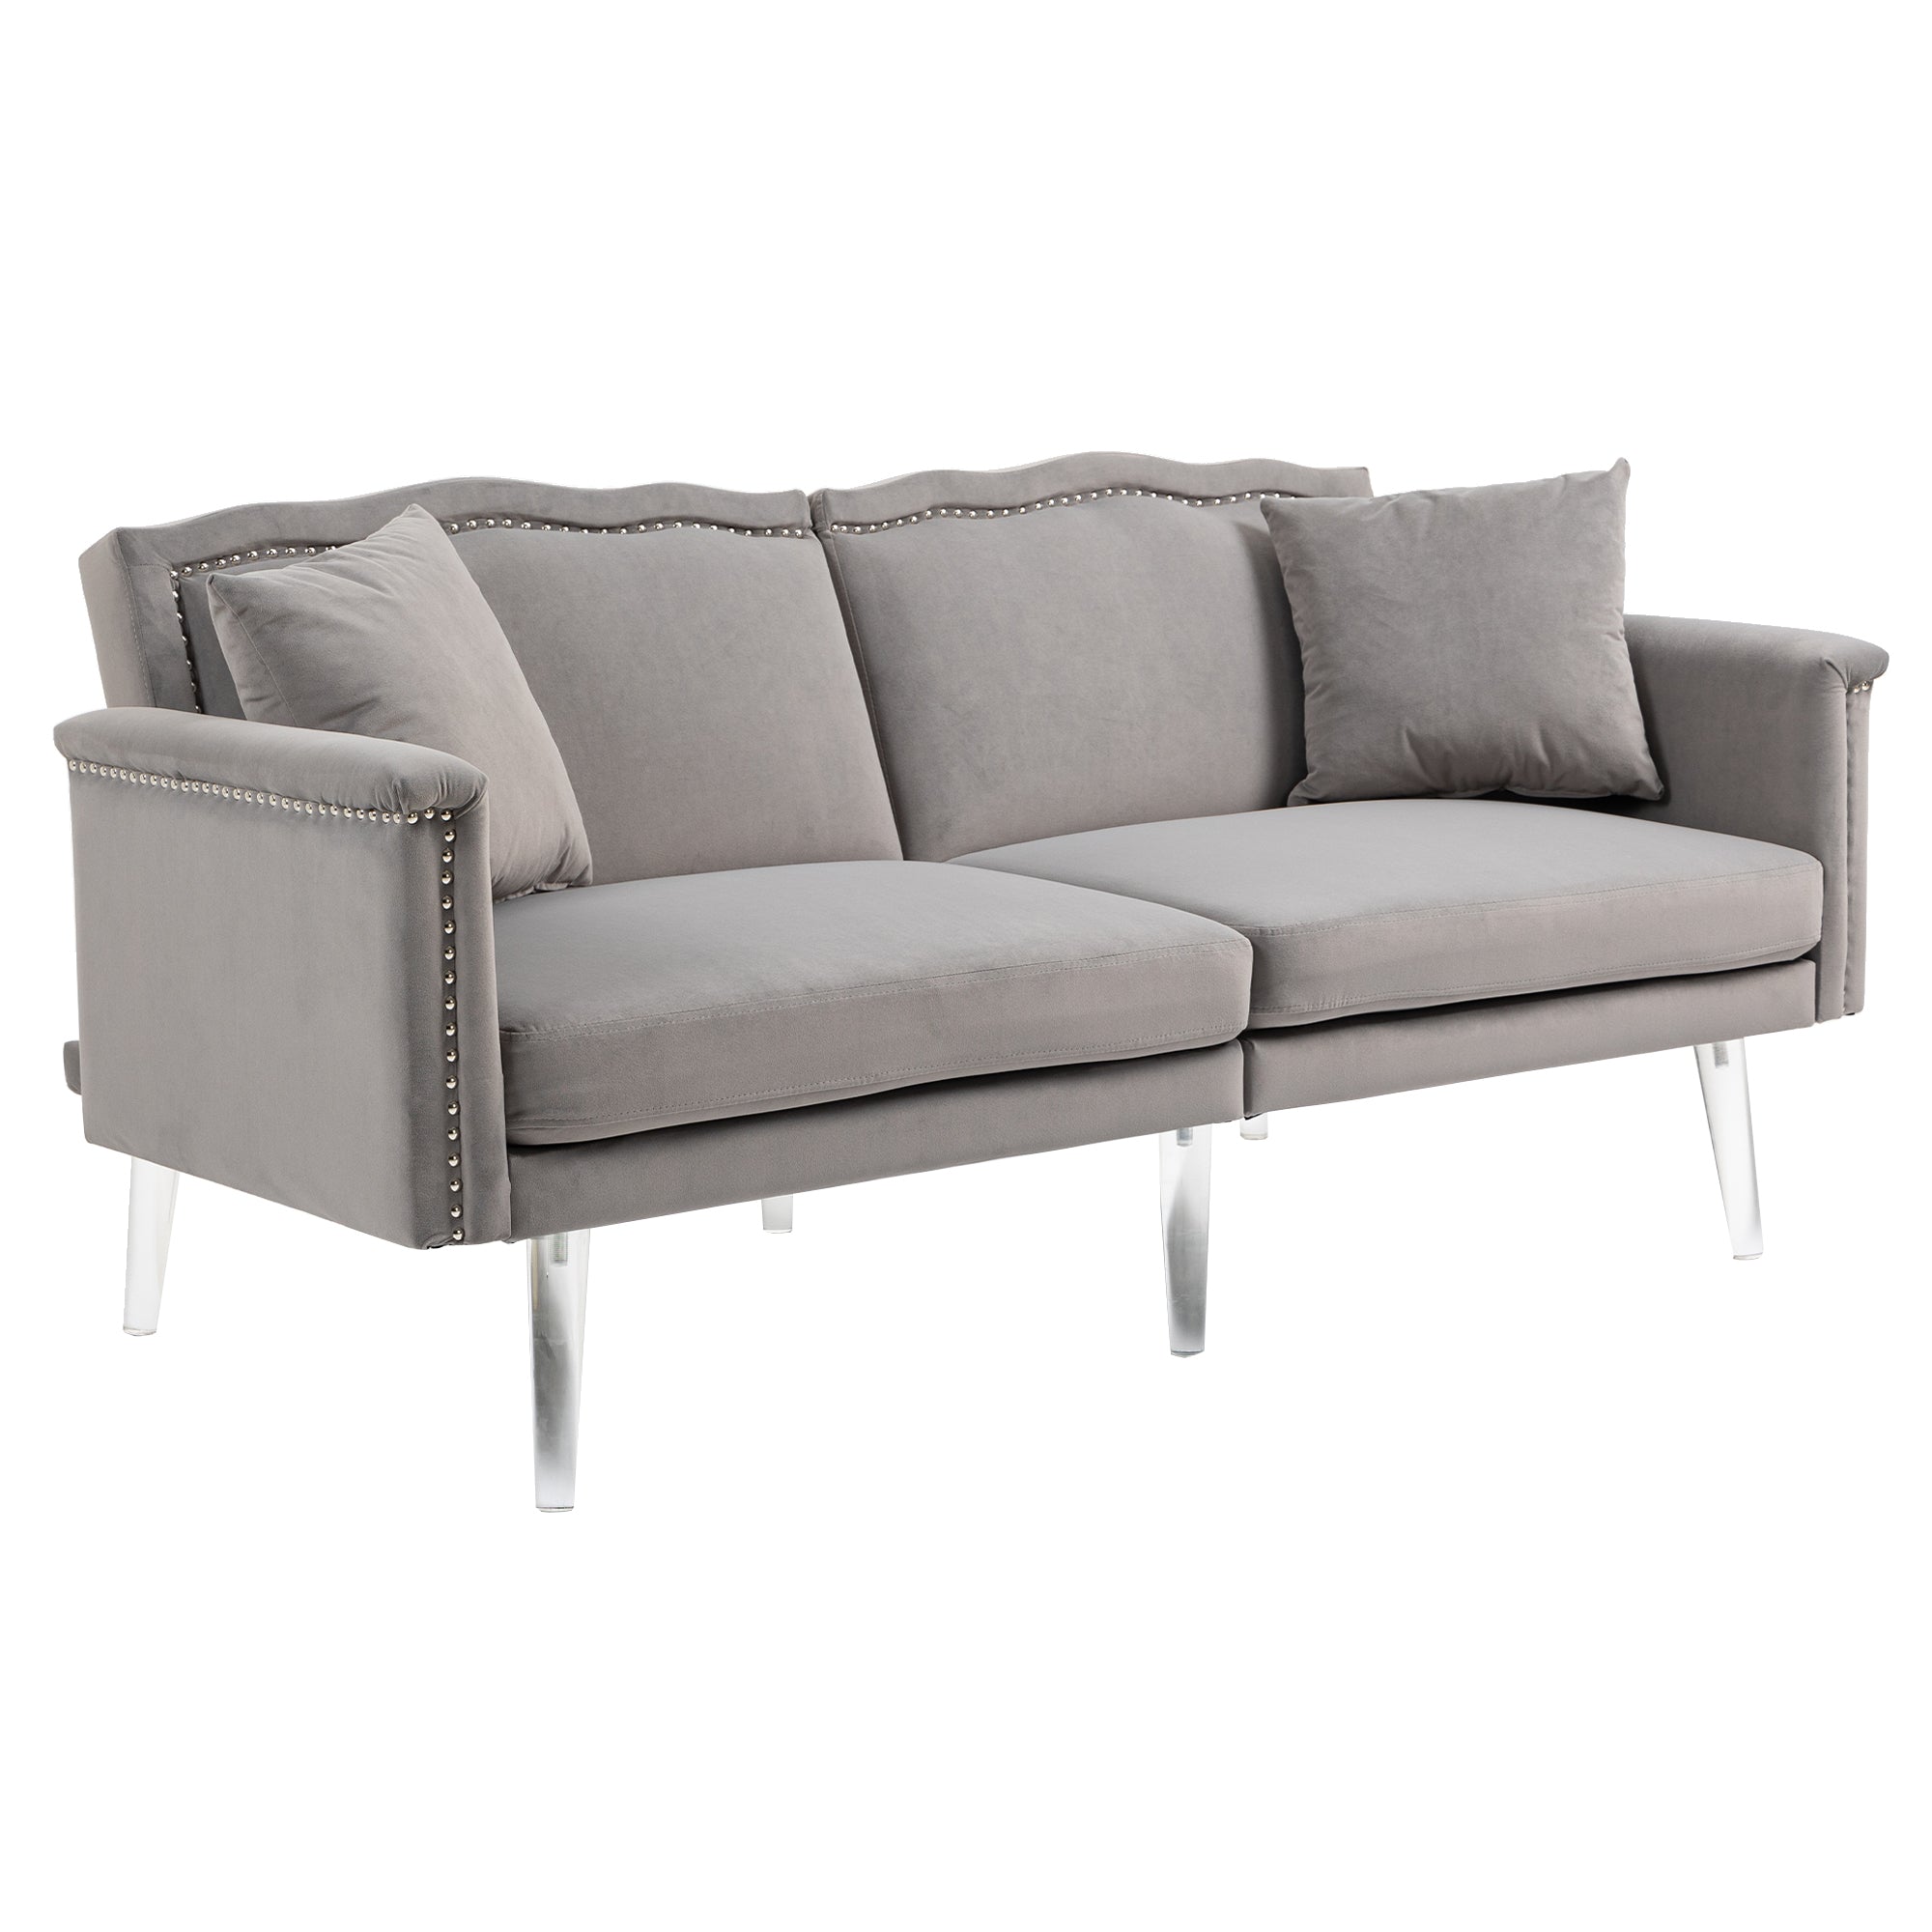 ZNTS COOLMORE Couches for Living Room Mid Century Modern Velvet Love Seats Sofa with 2 Pillows, Loveseat W153985000